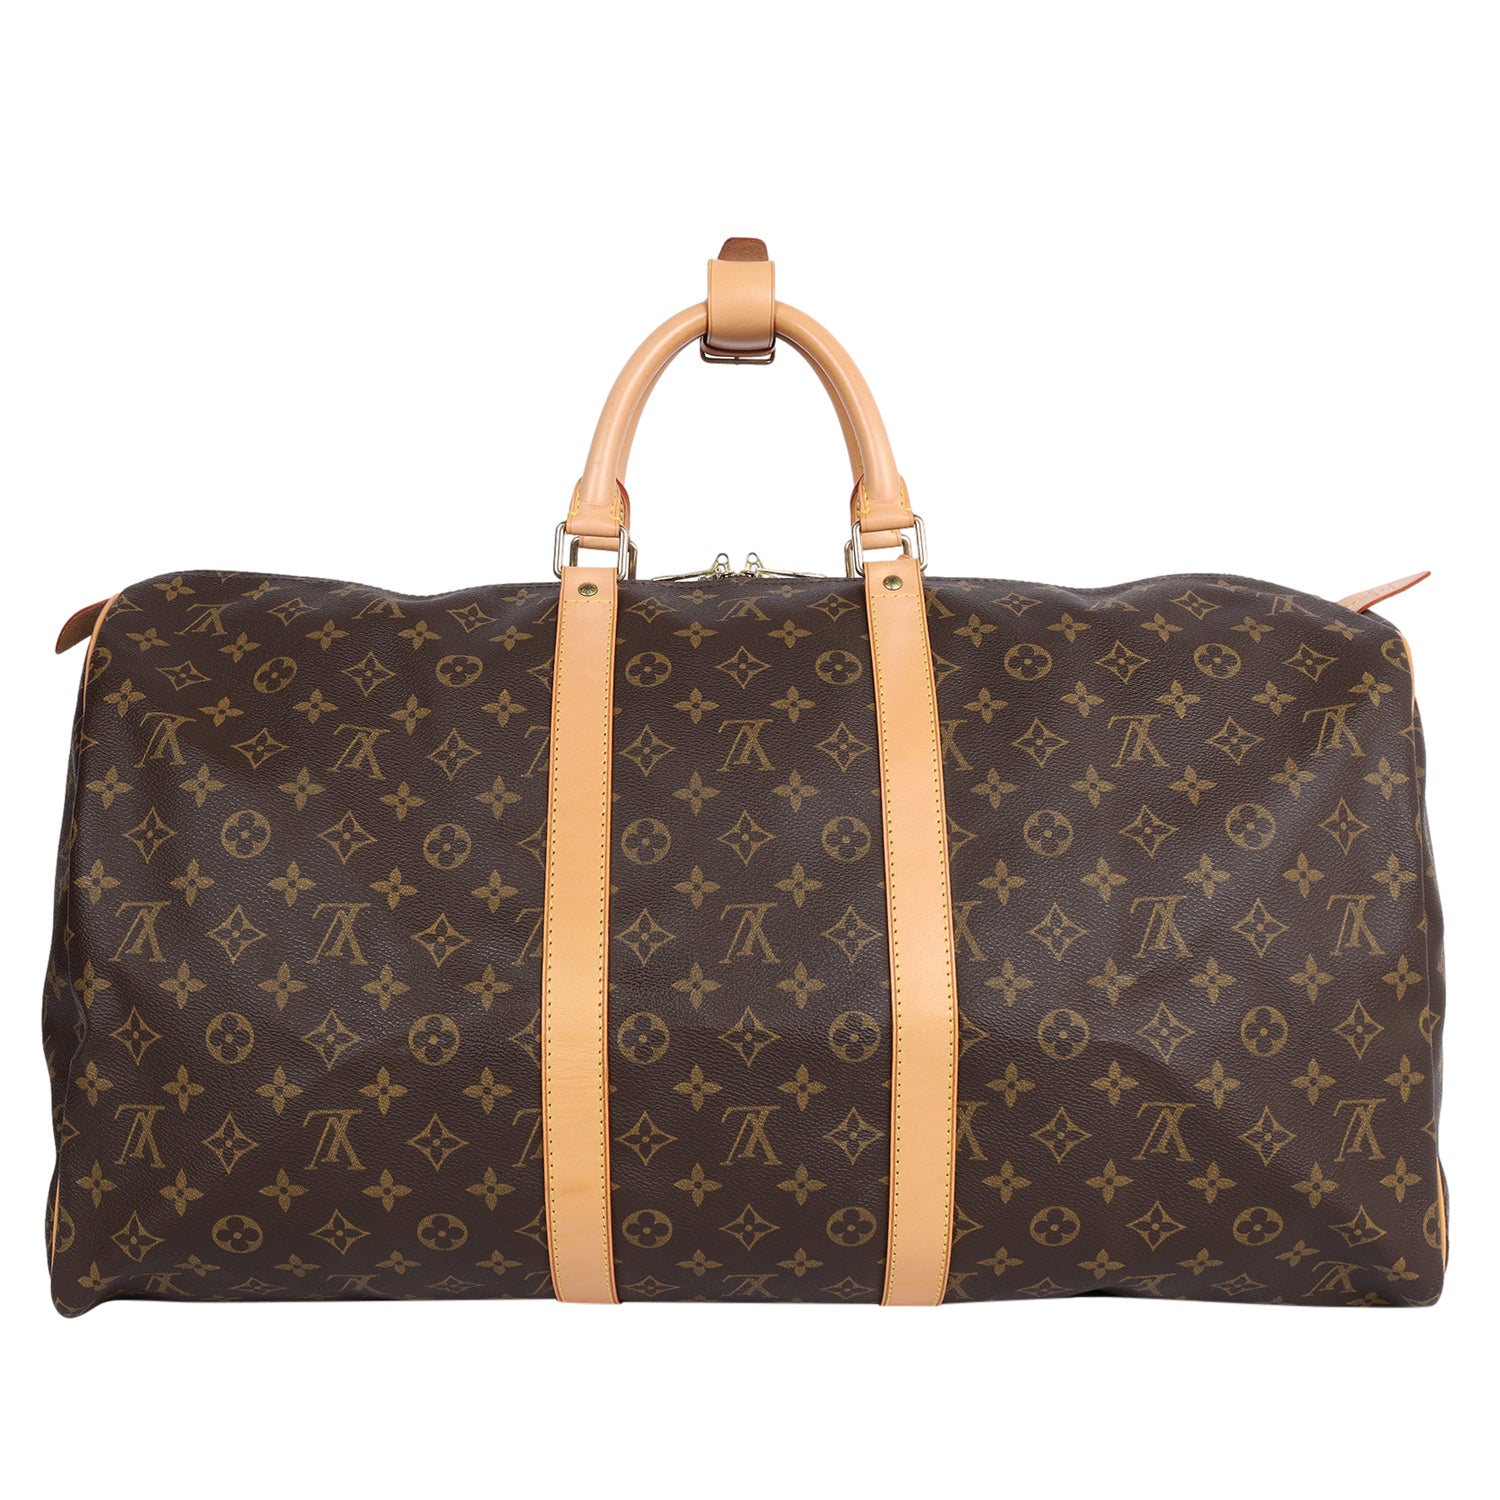 Authentic Louis Vuitton LV Keepall 55 in Epi Leather